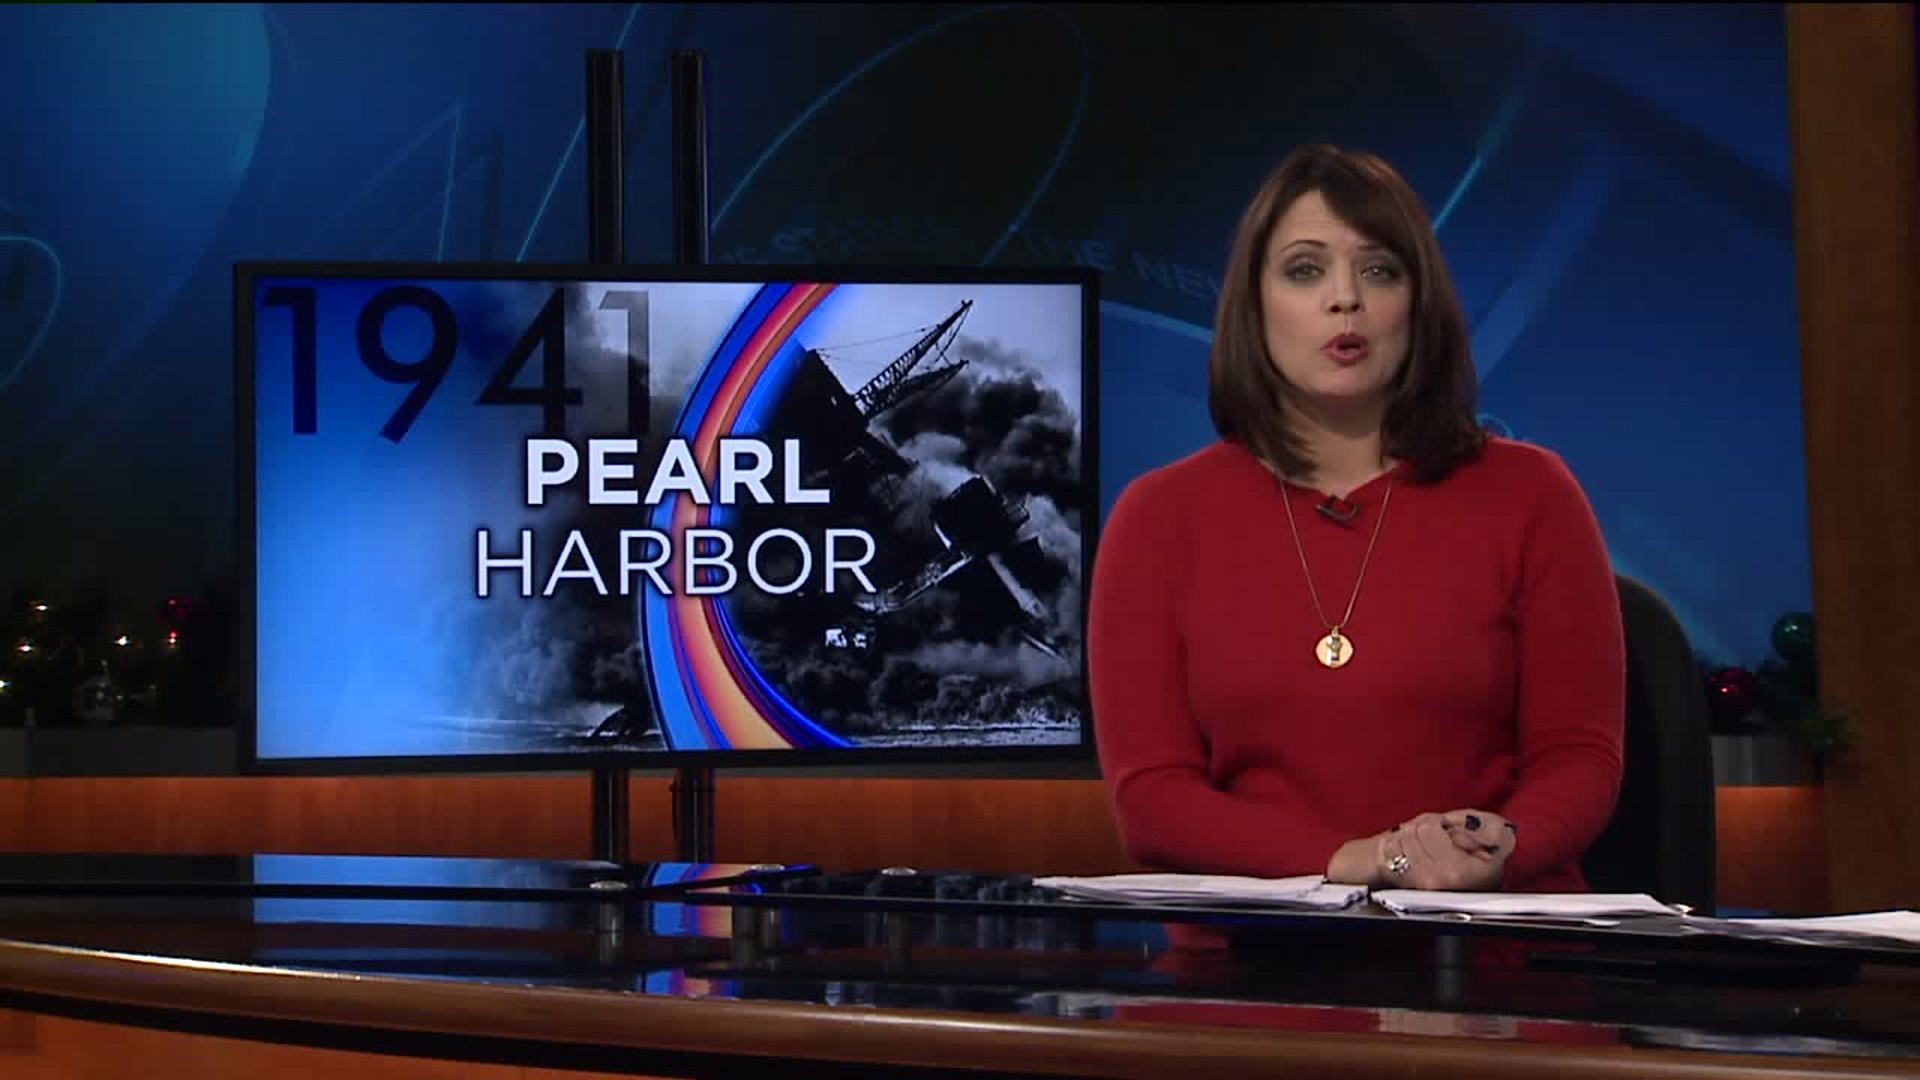 Flags Fly at Half-Staff in Remembrance of Pearl Harbor Attack